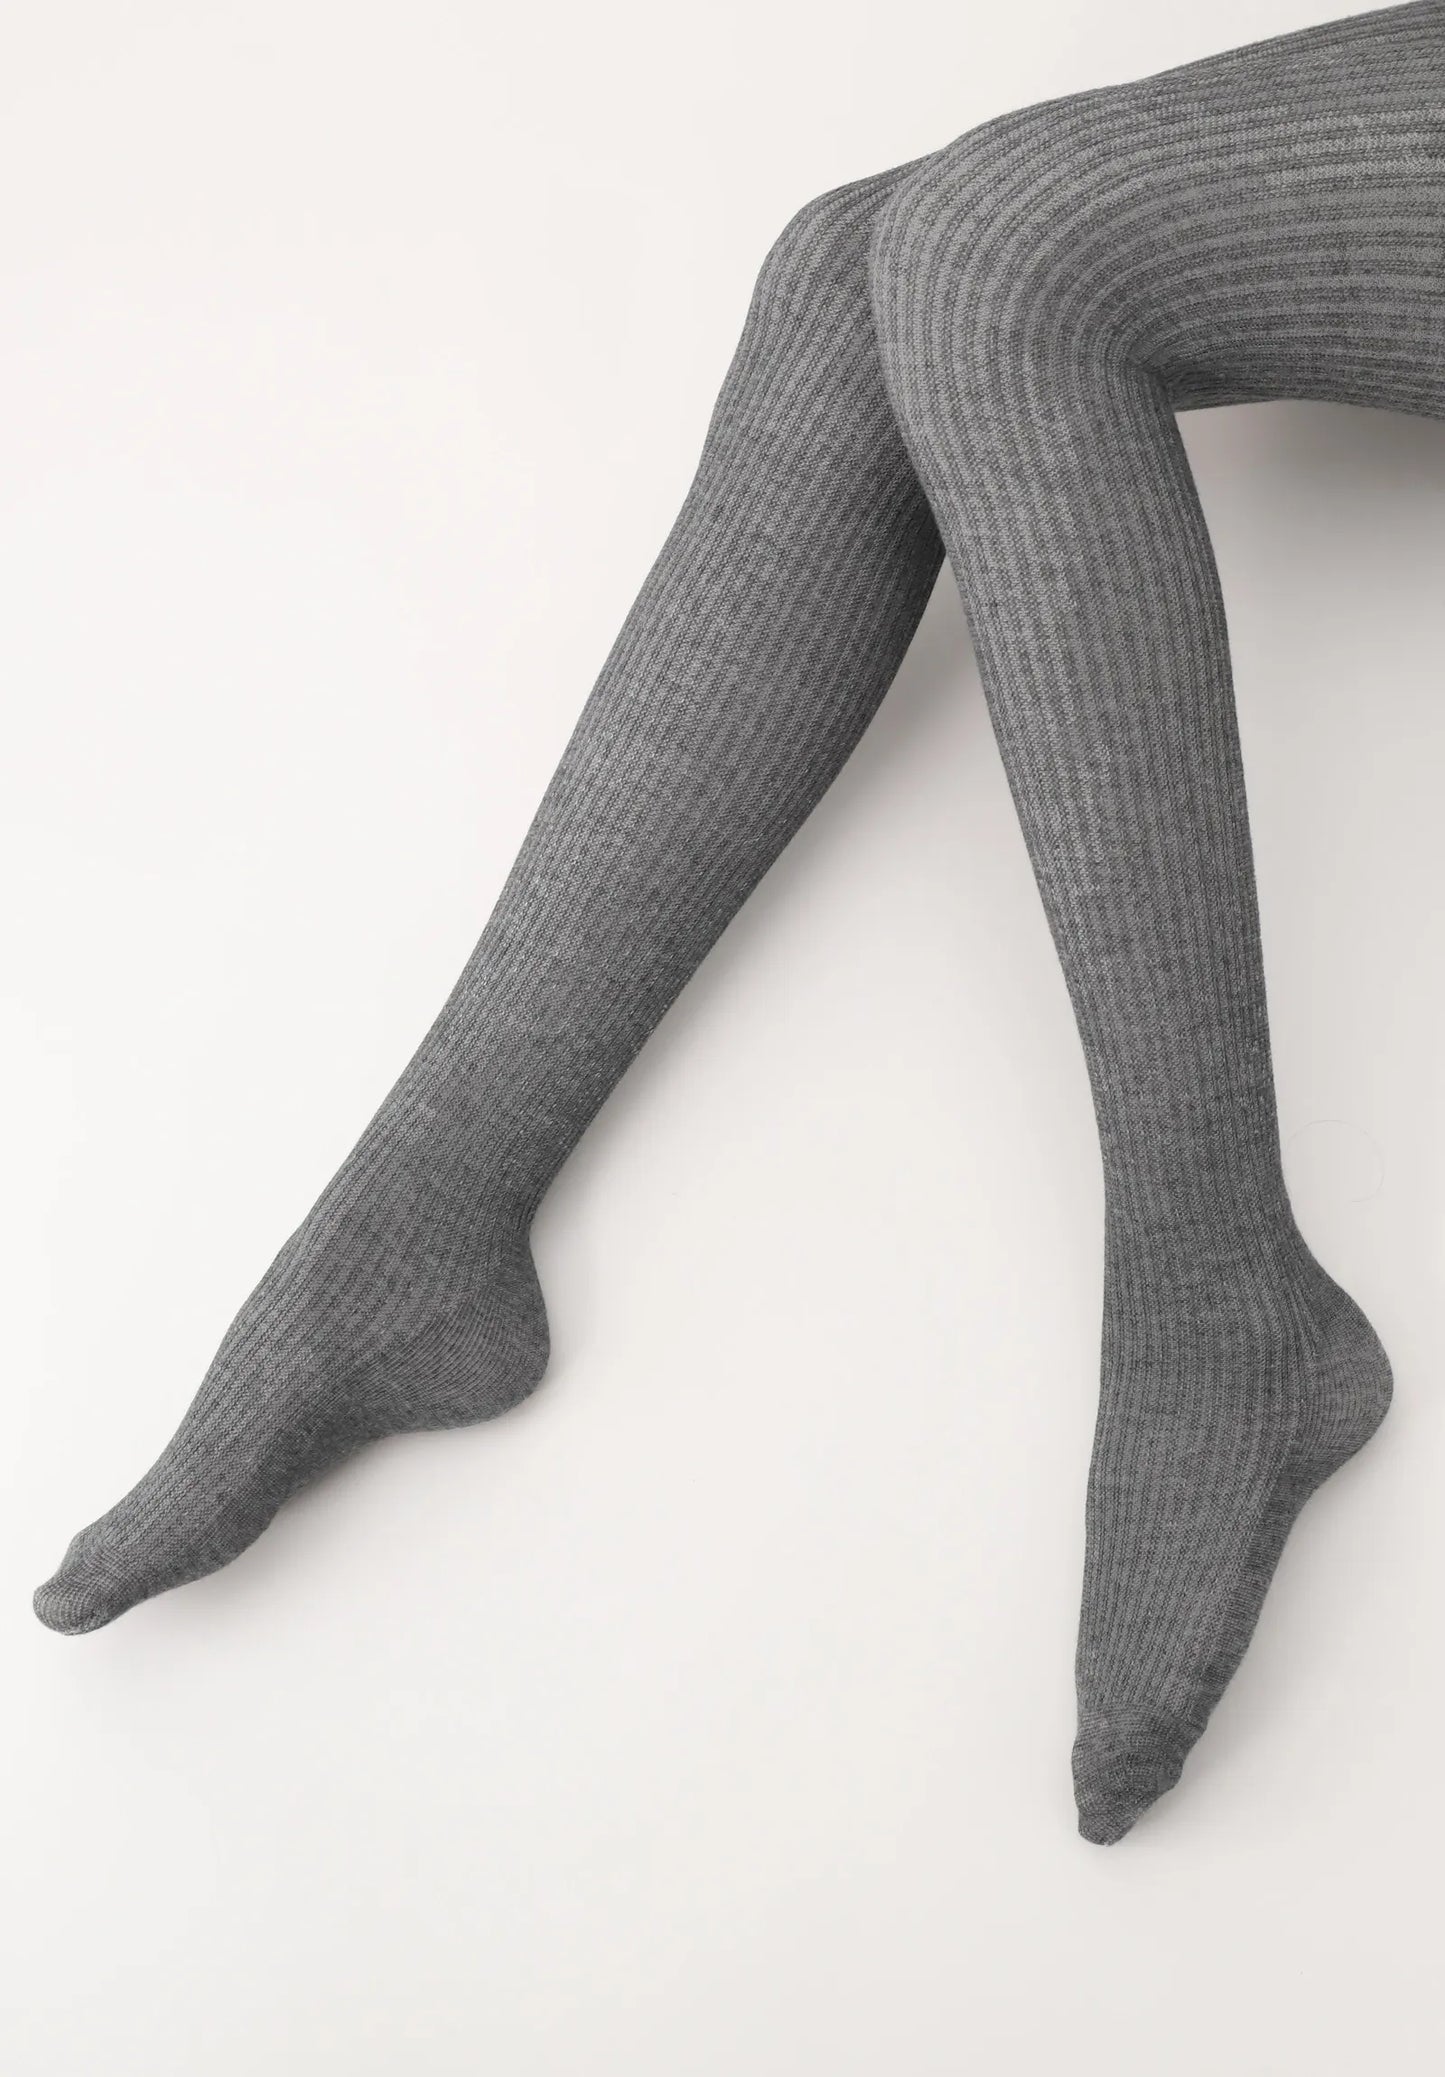 Oroblu Eco Natural Rib Tights - Light grey ribbed knitted tights made of soft recycled polyester and viscose with built in shoe liner socks.